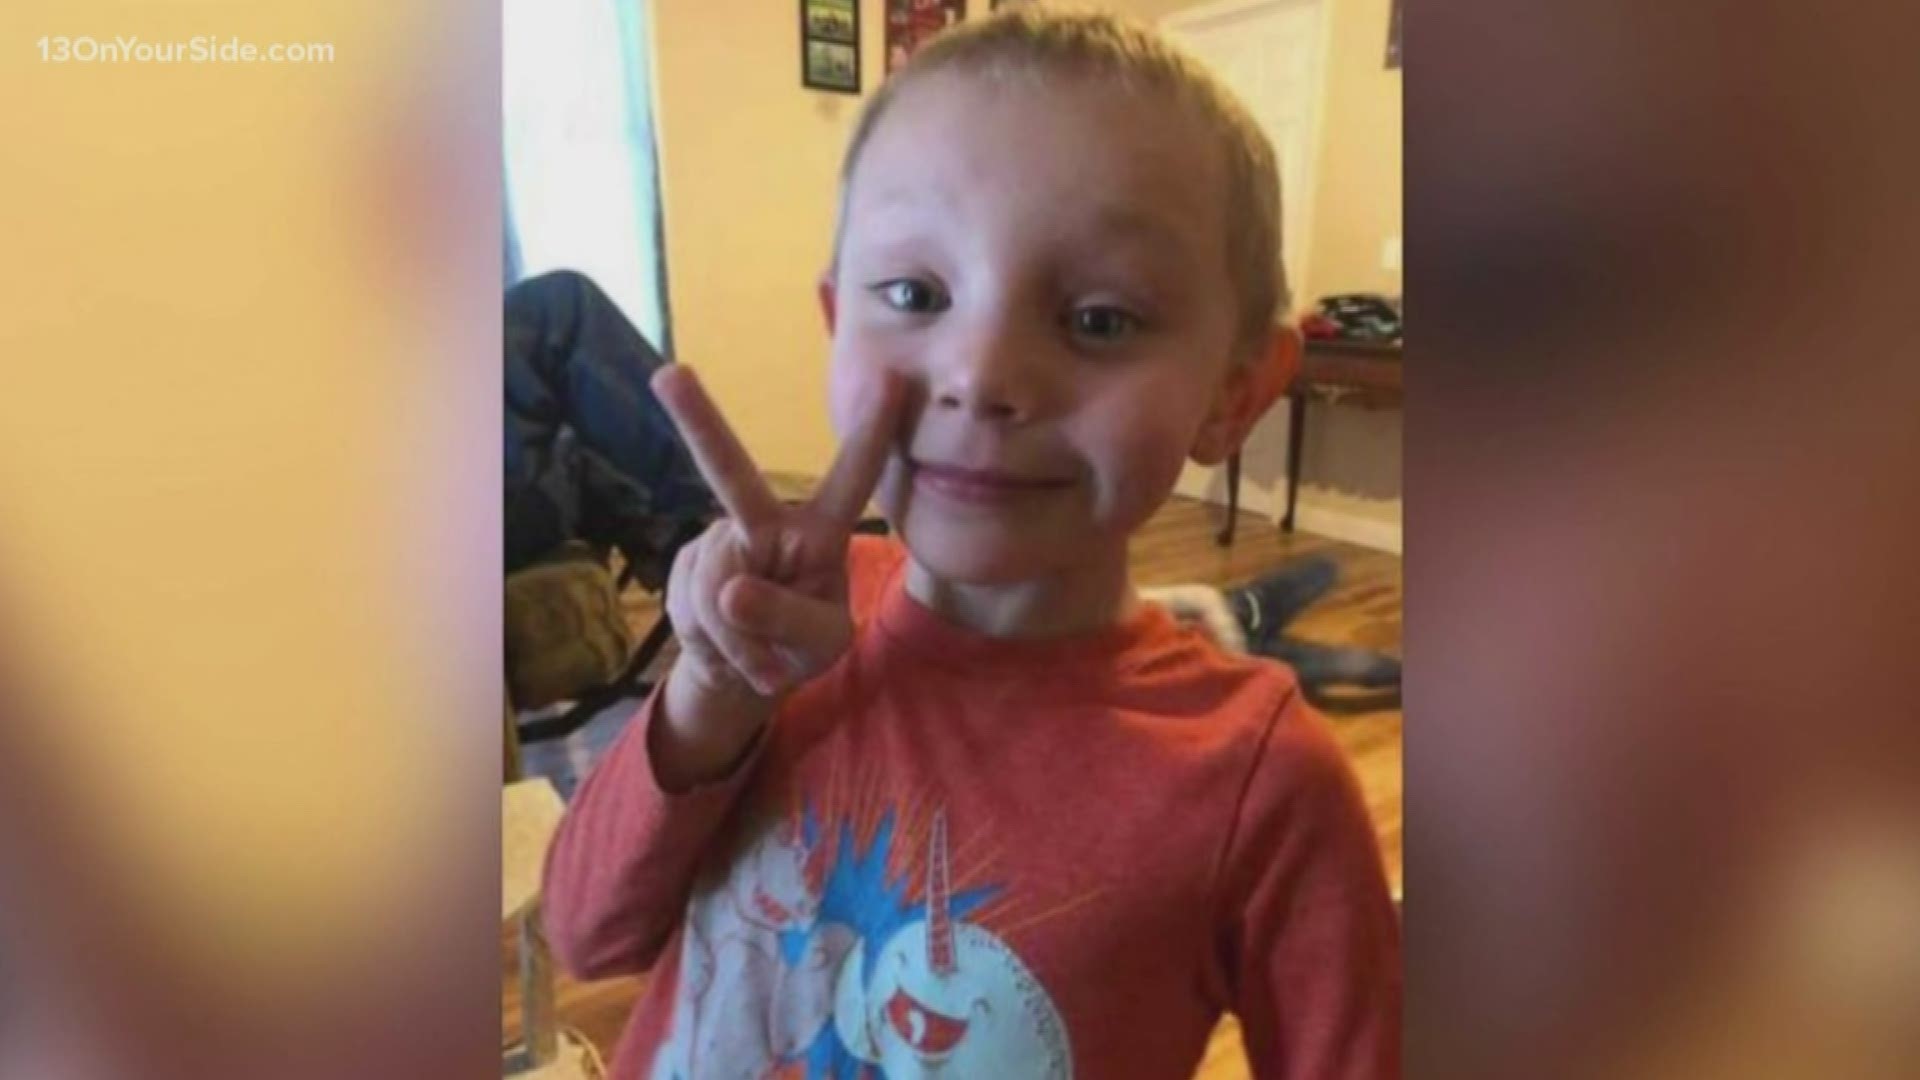 Beau Belson went missing around 2:30 p.m. on Christmas Day from his grandmother's home near N. Holland Road and Fleck Road.